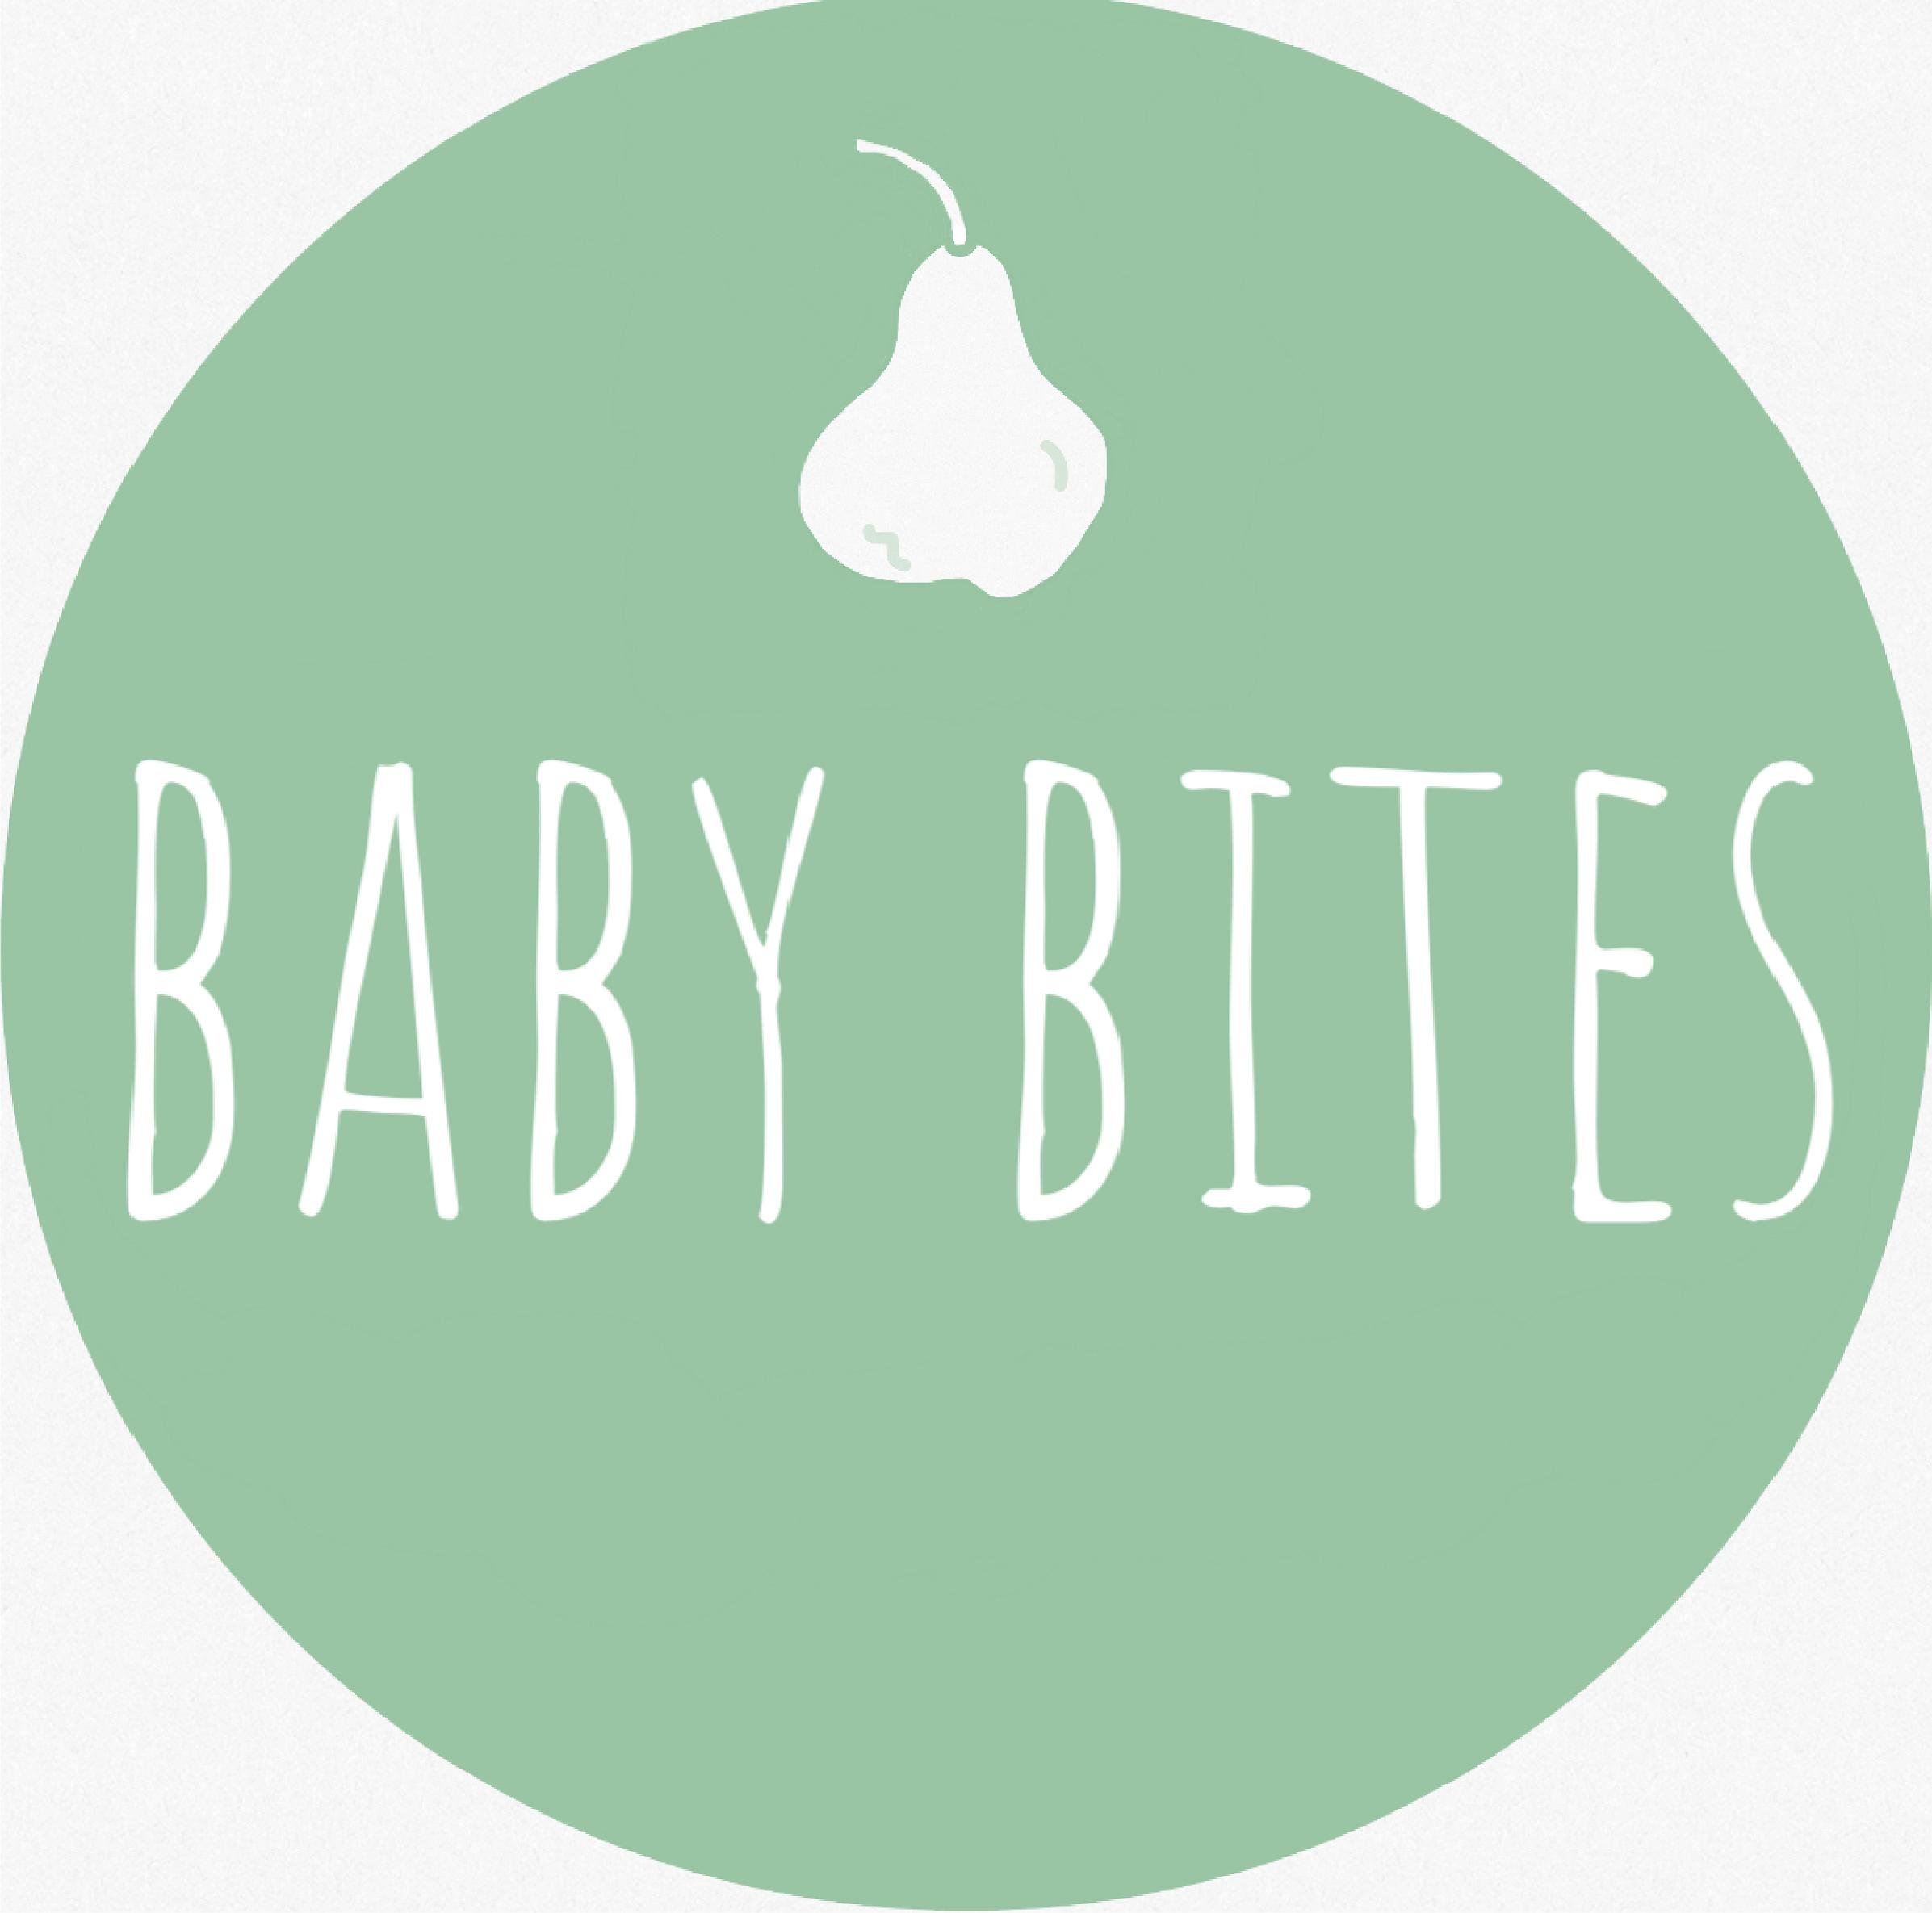 Baby Bites specialises in helping parents from all walks of life how to prepare healthy, nutritious meals and snacks from Baby Led Weaning Stages 1 to 3.